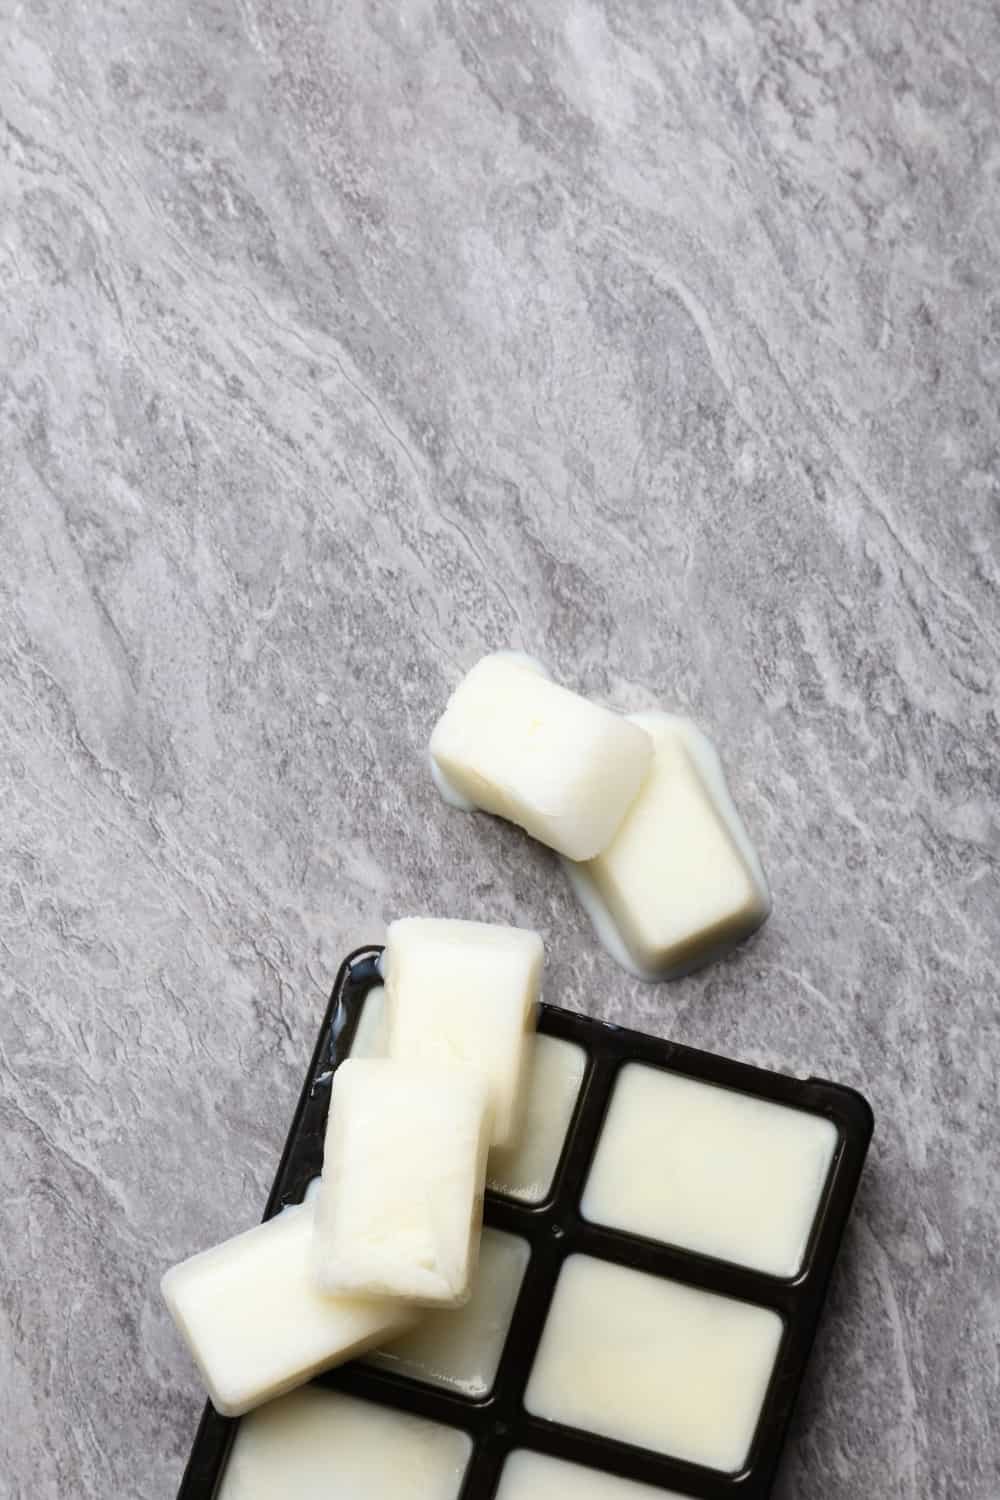 Ice cubes made with milk and tray on grey background